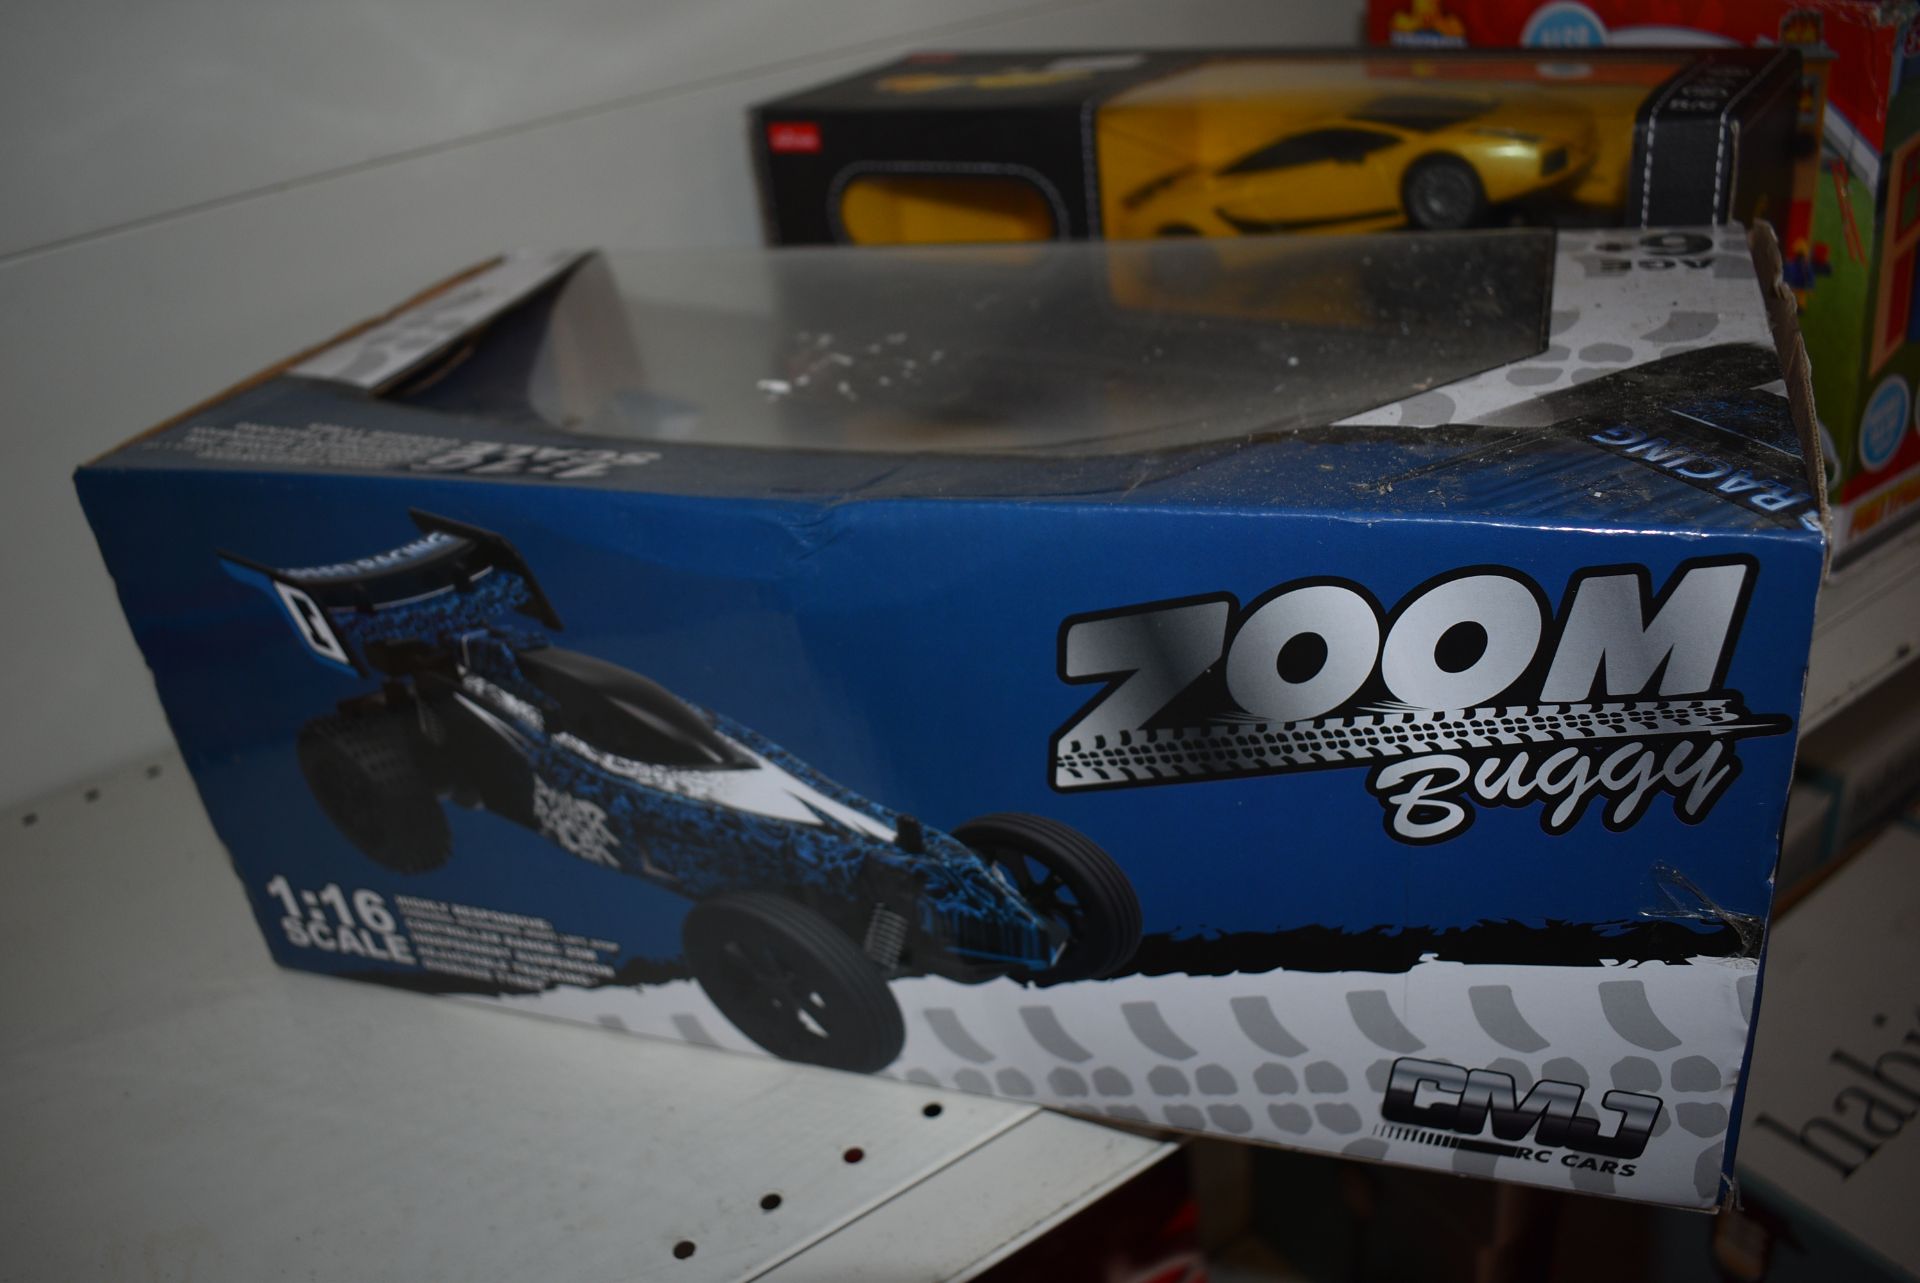 Zoom Remote Control Buggy - Image 3 of 4